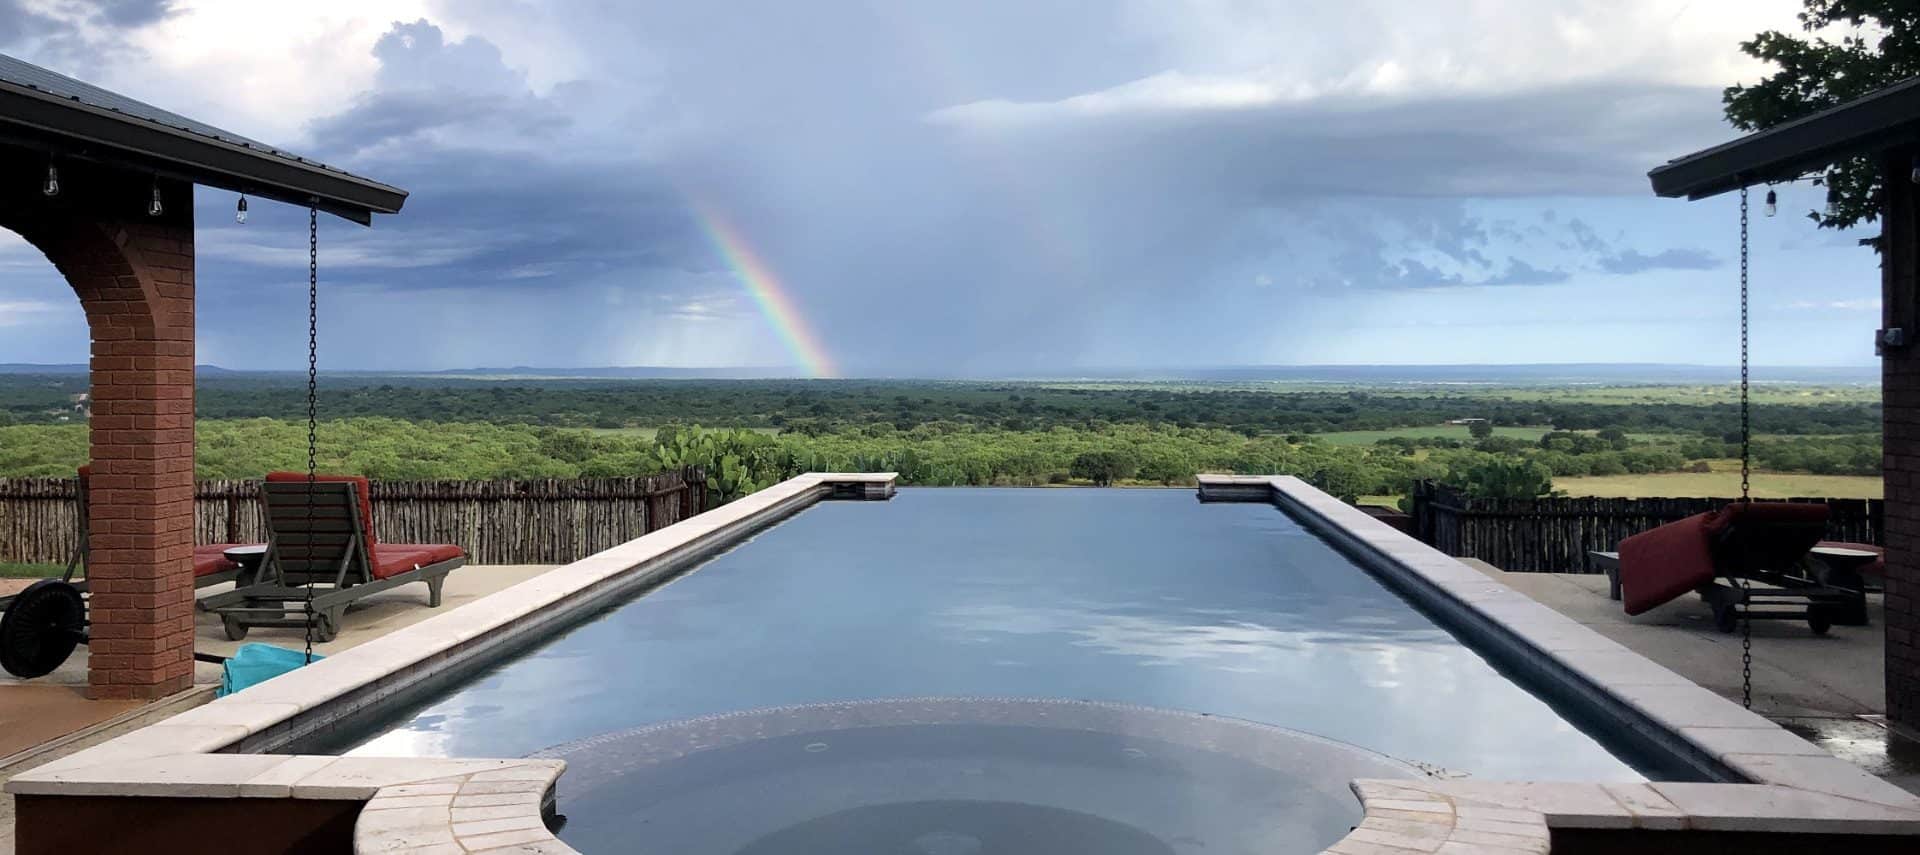 Large patio with infinity pool looking out in the distance with green trees, storm clouds, and rainbow